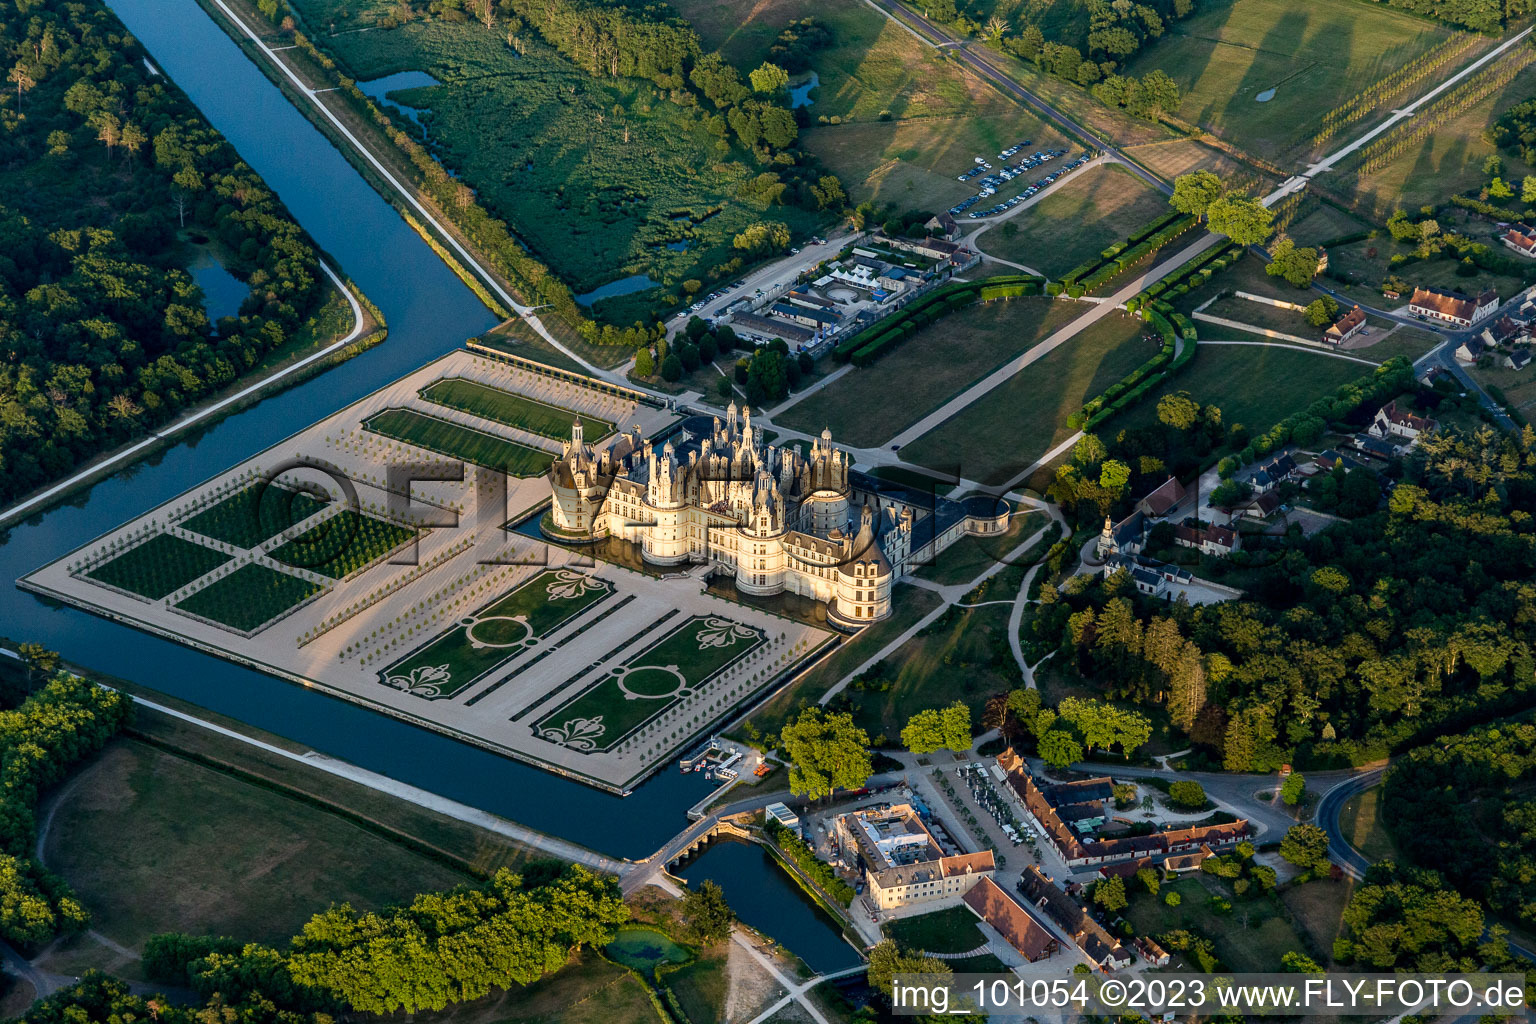 Chateau de Chambord with castle park and Cosson canal in Chambord in the state Loir et Cher, France